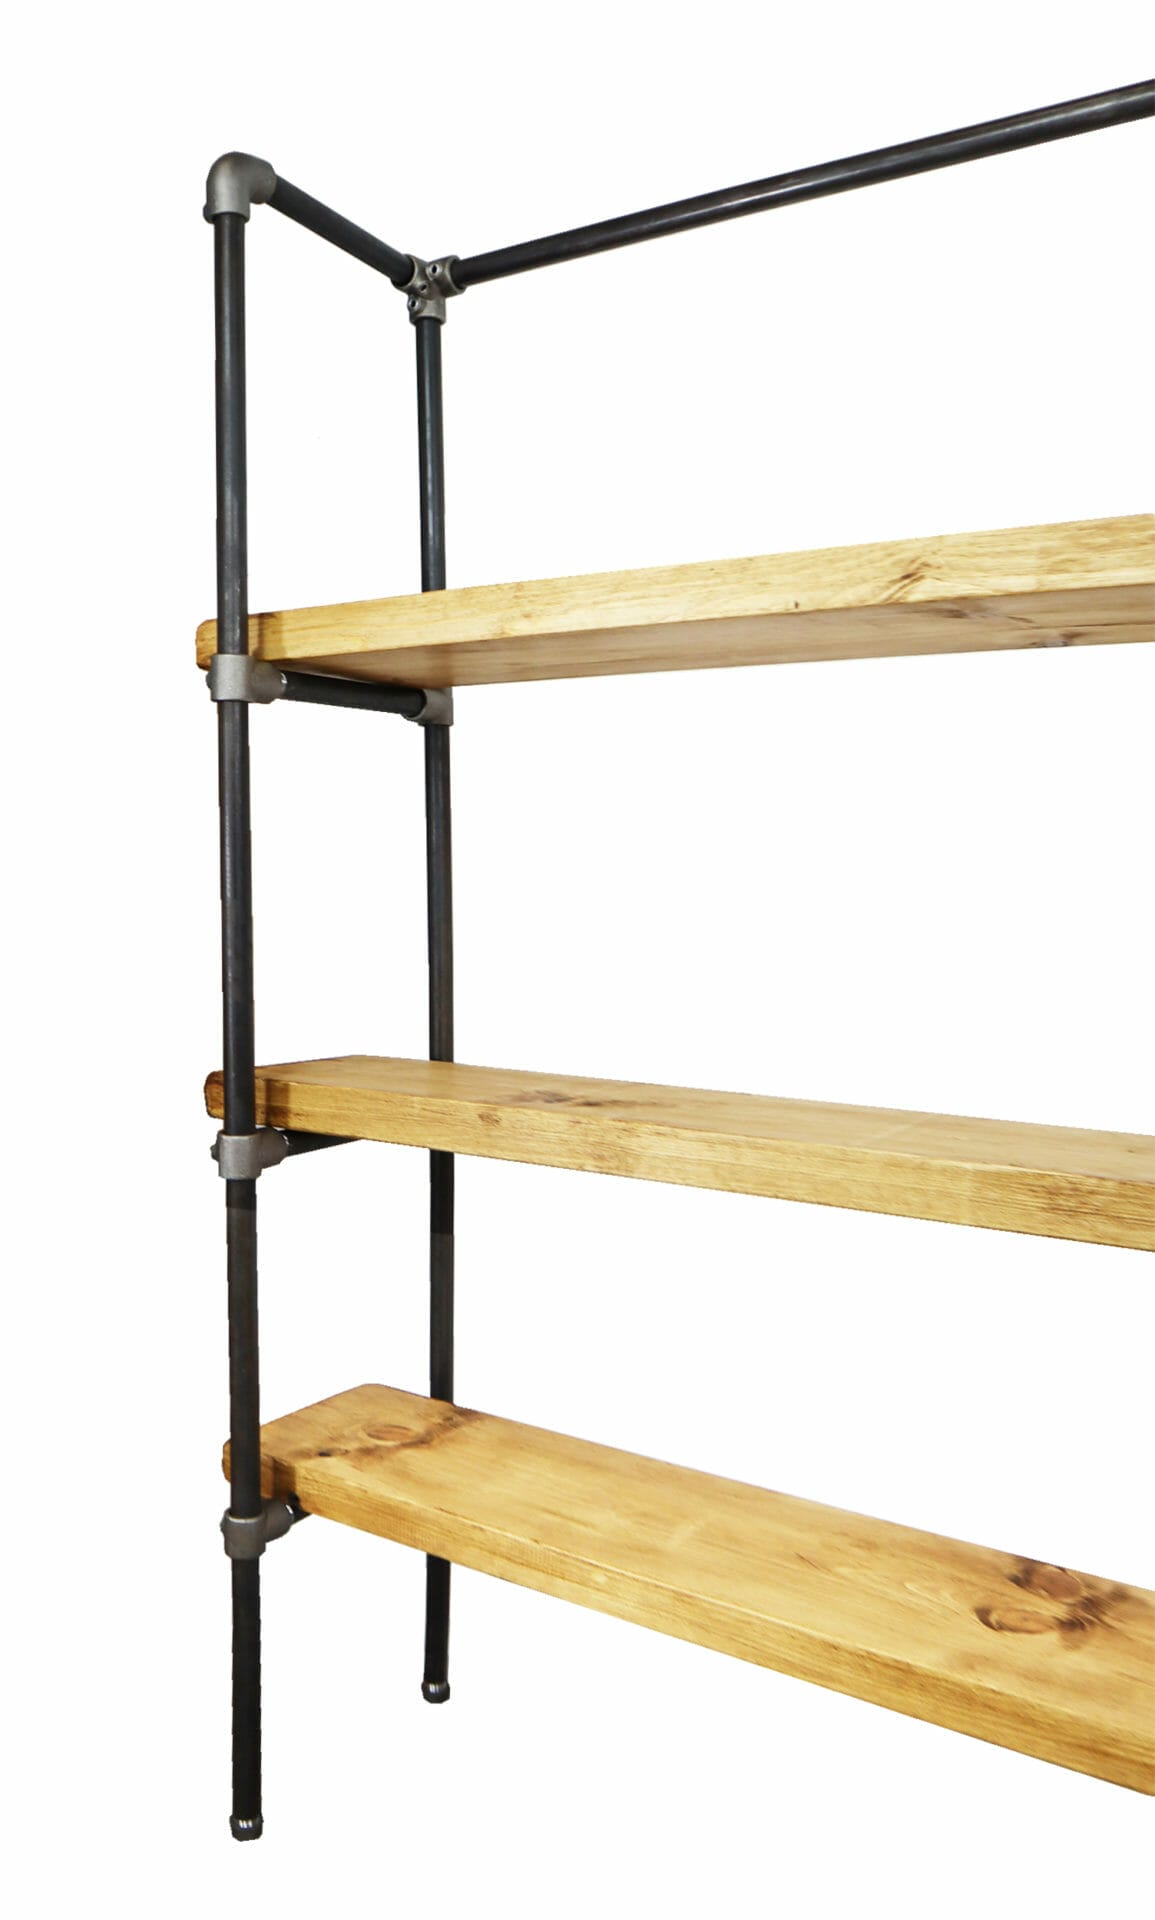 Raw steel industrial pipe shelving unit with reclaimed wooden shelves